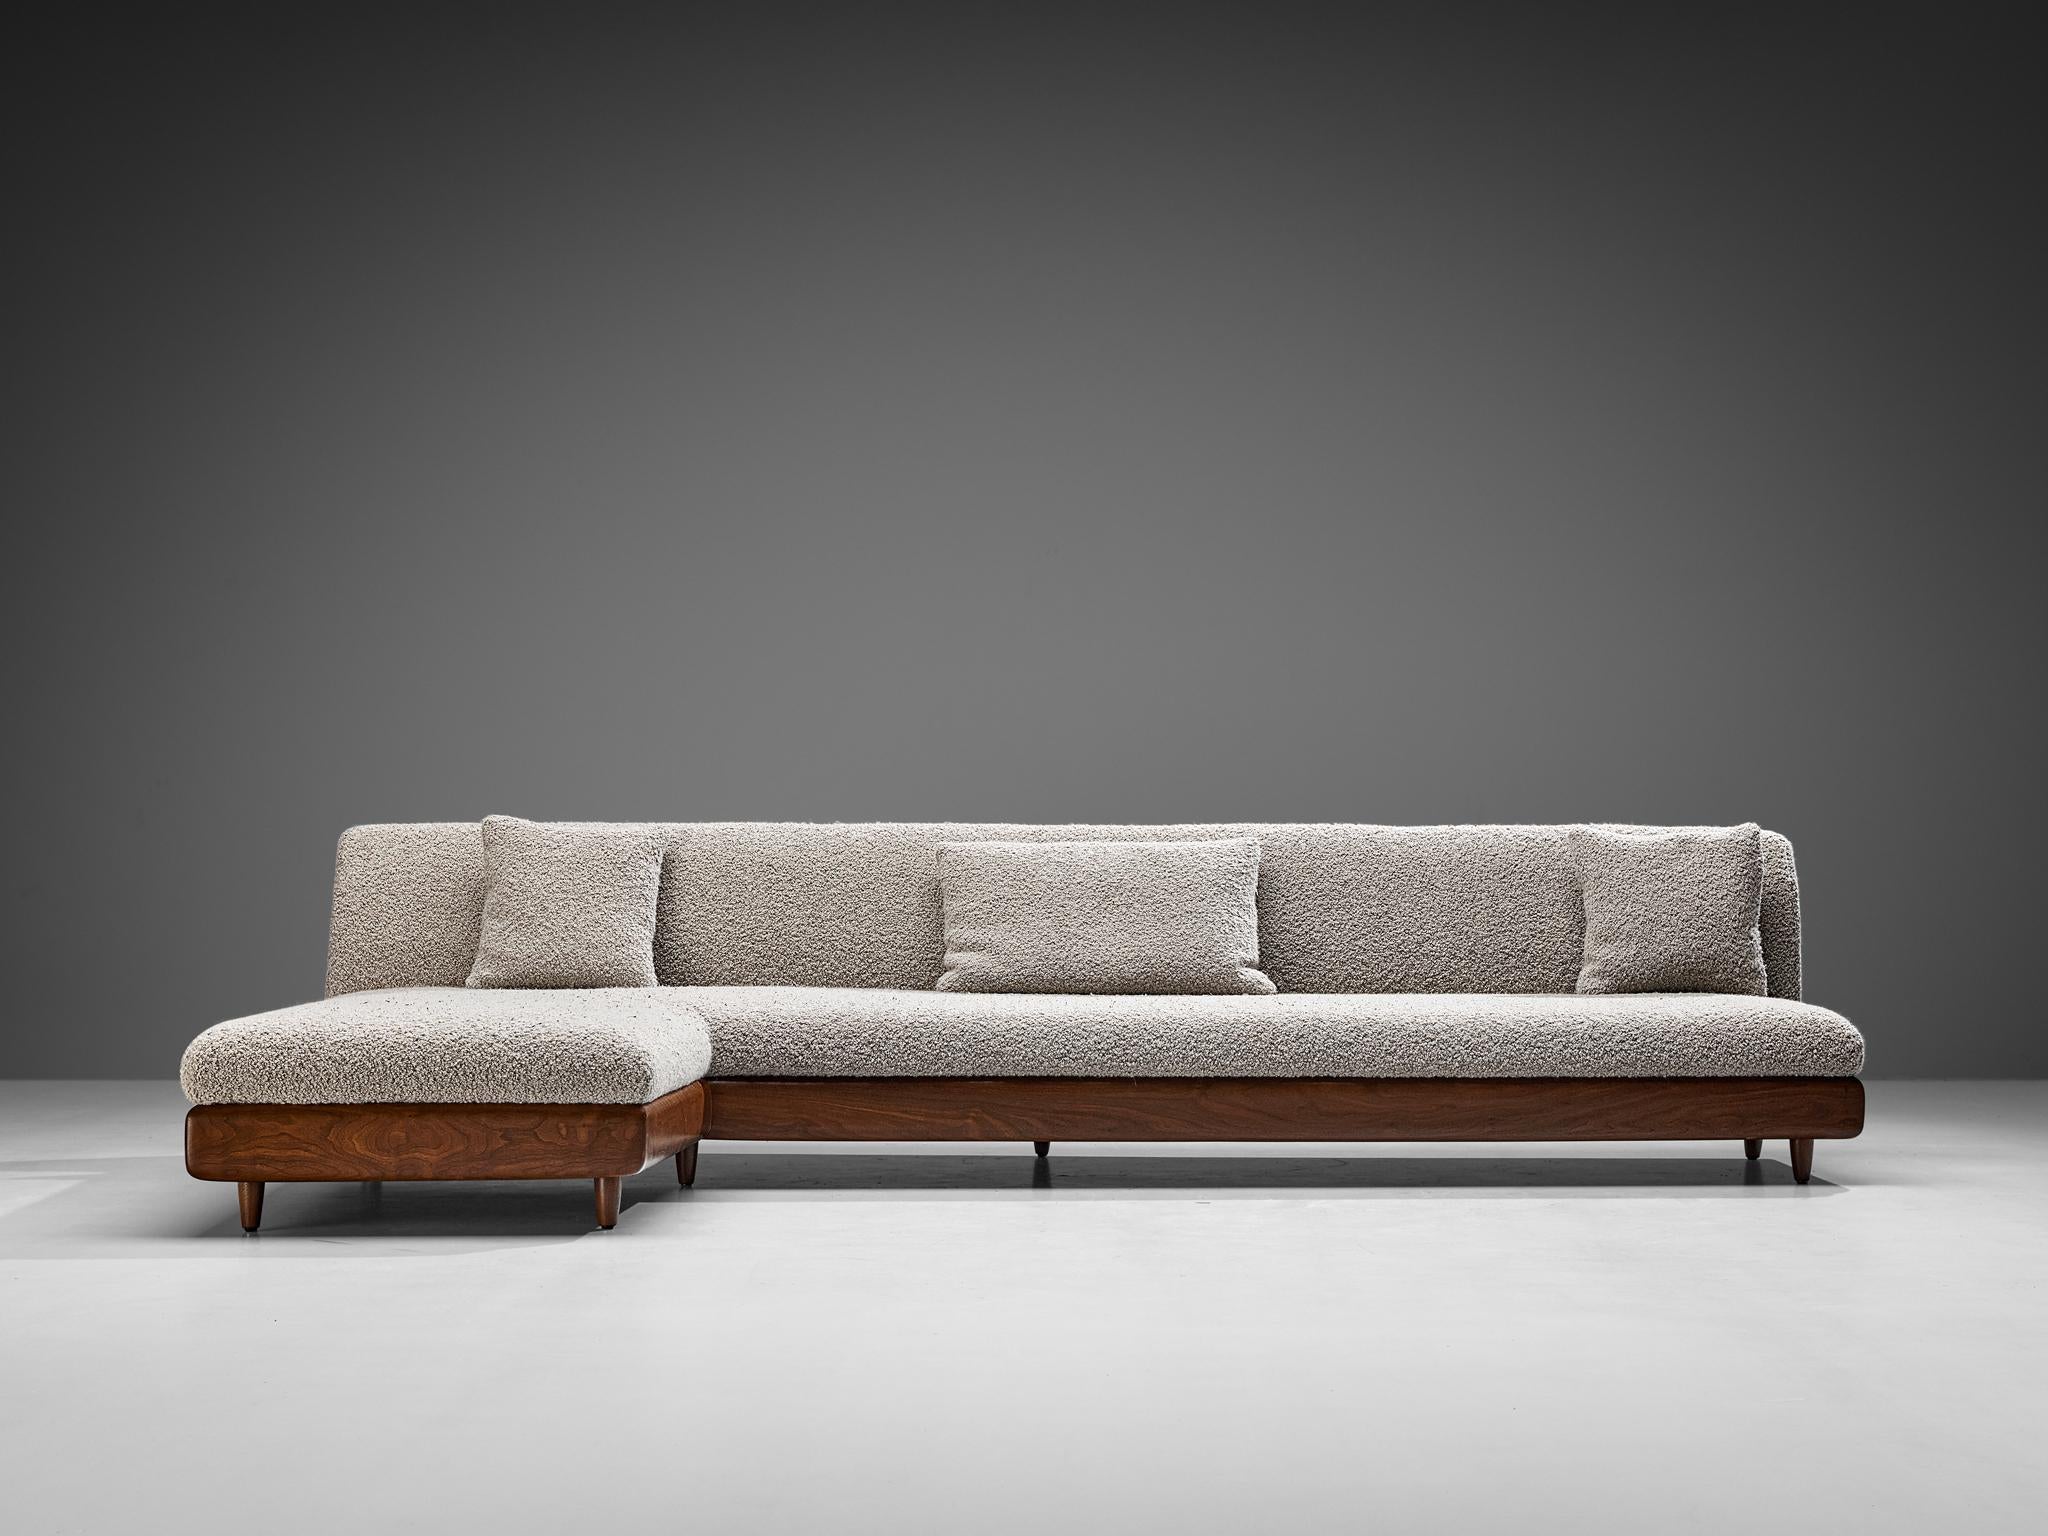 Adrian Pearsall Grand Boomerang Sofa Upholstered in Luxurious Pierre Frey